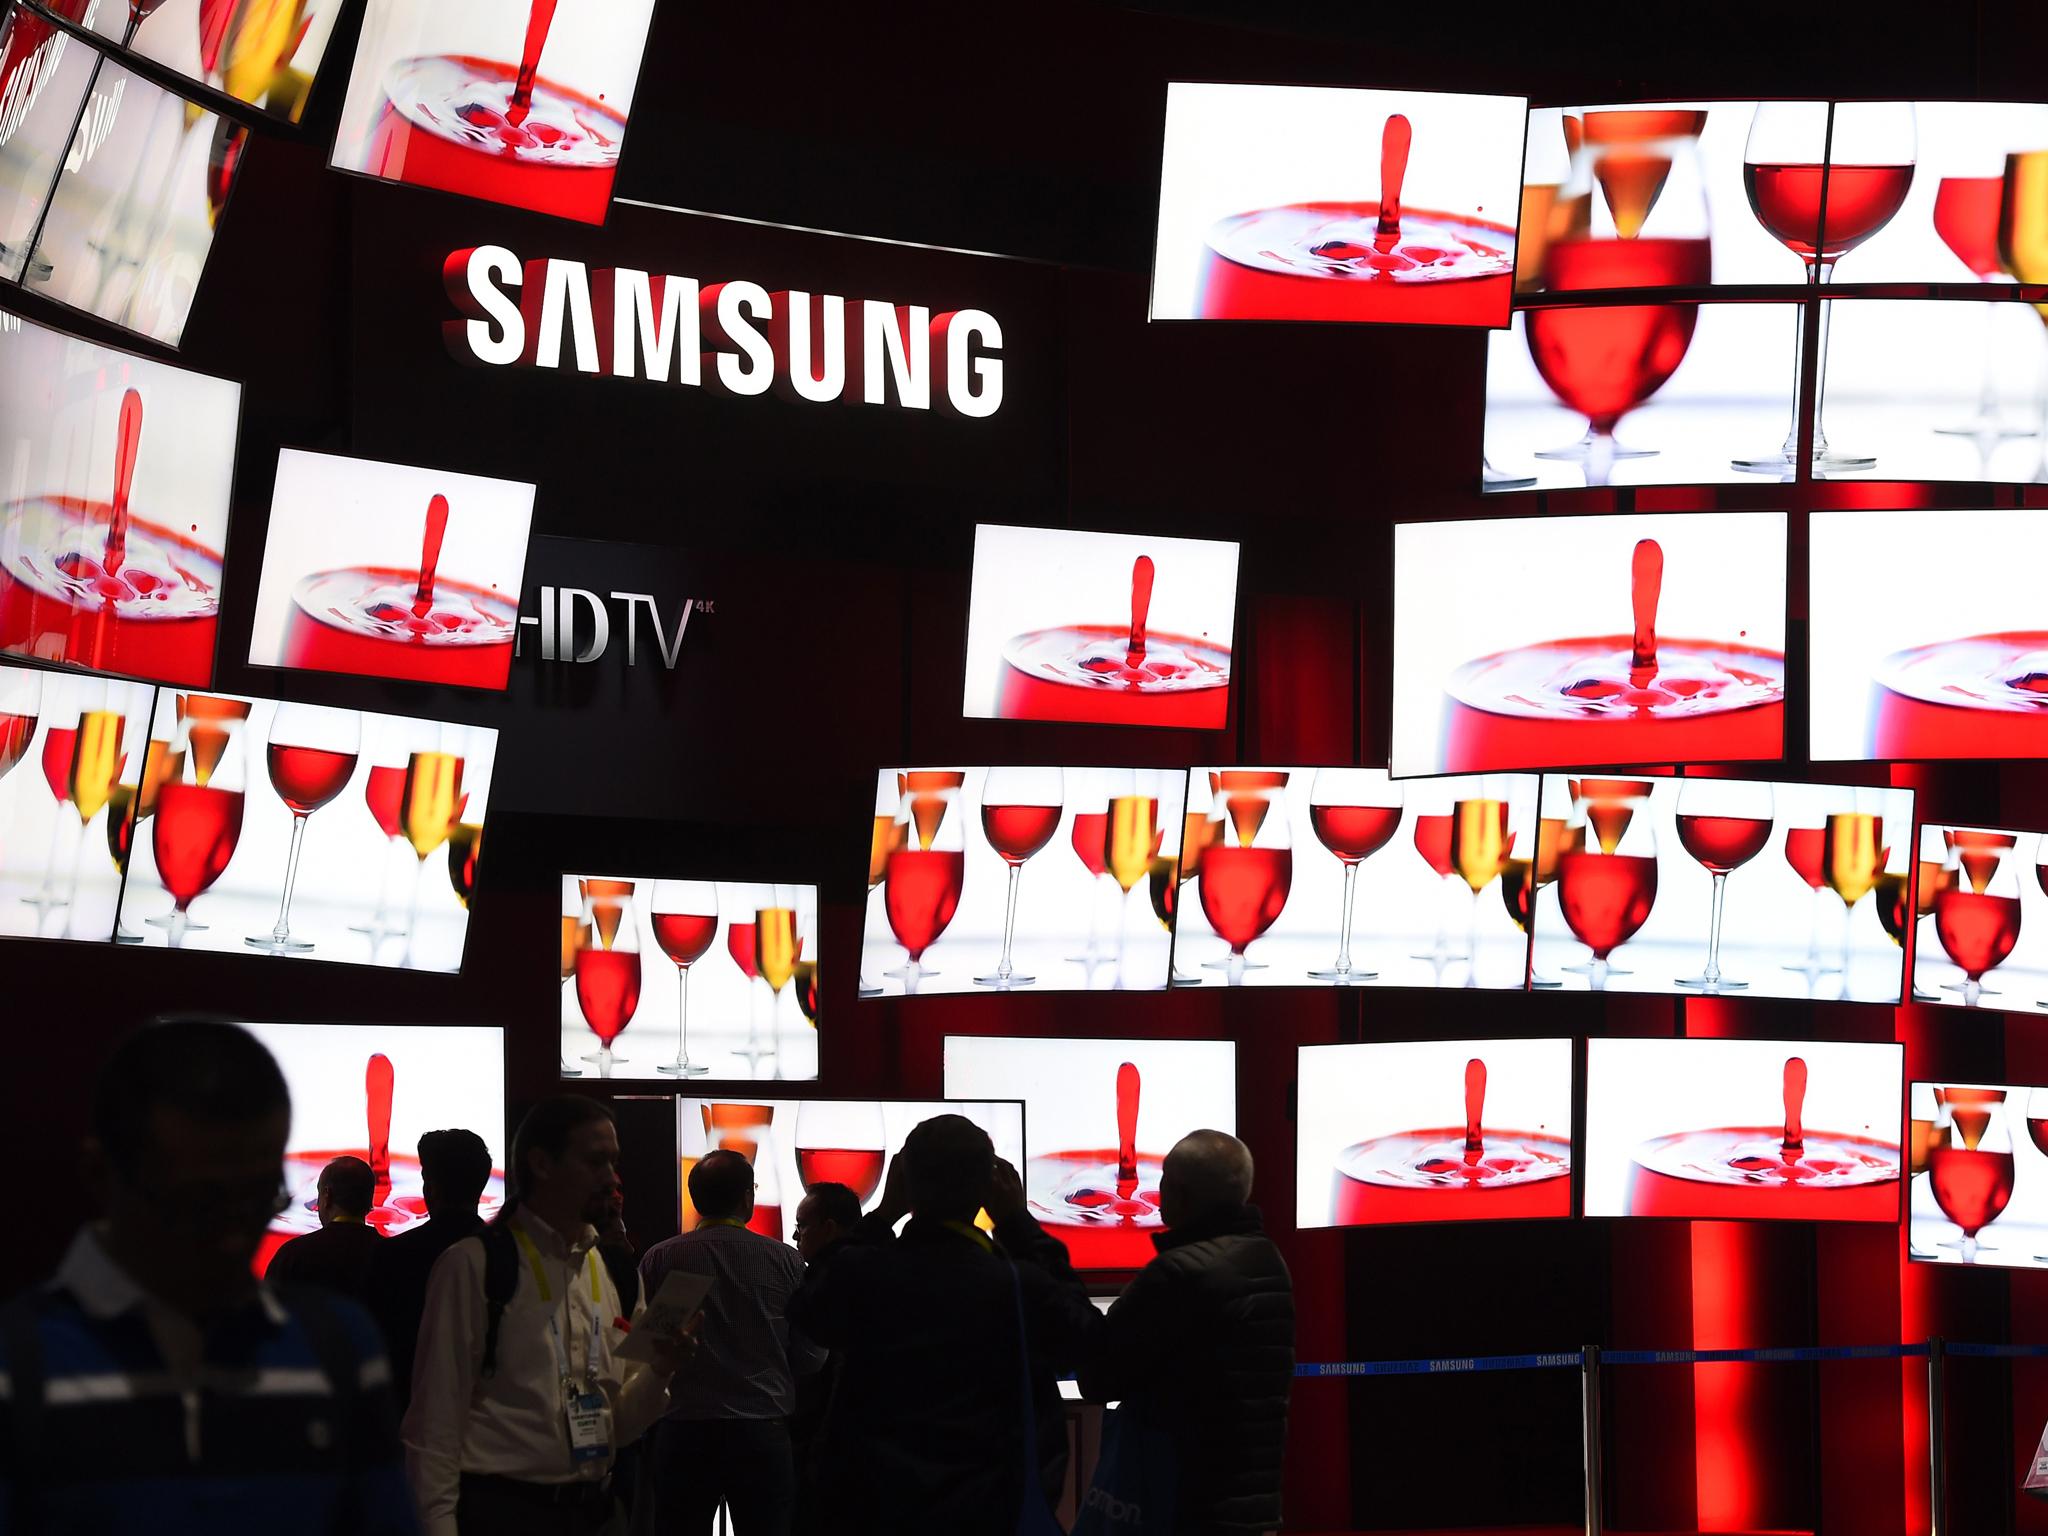 US activist group Electronic Frontier Foundation has drawn the world’s attention to the small print in Samsung's smart TV privacy policy